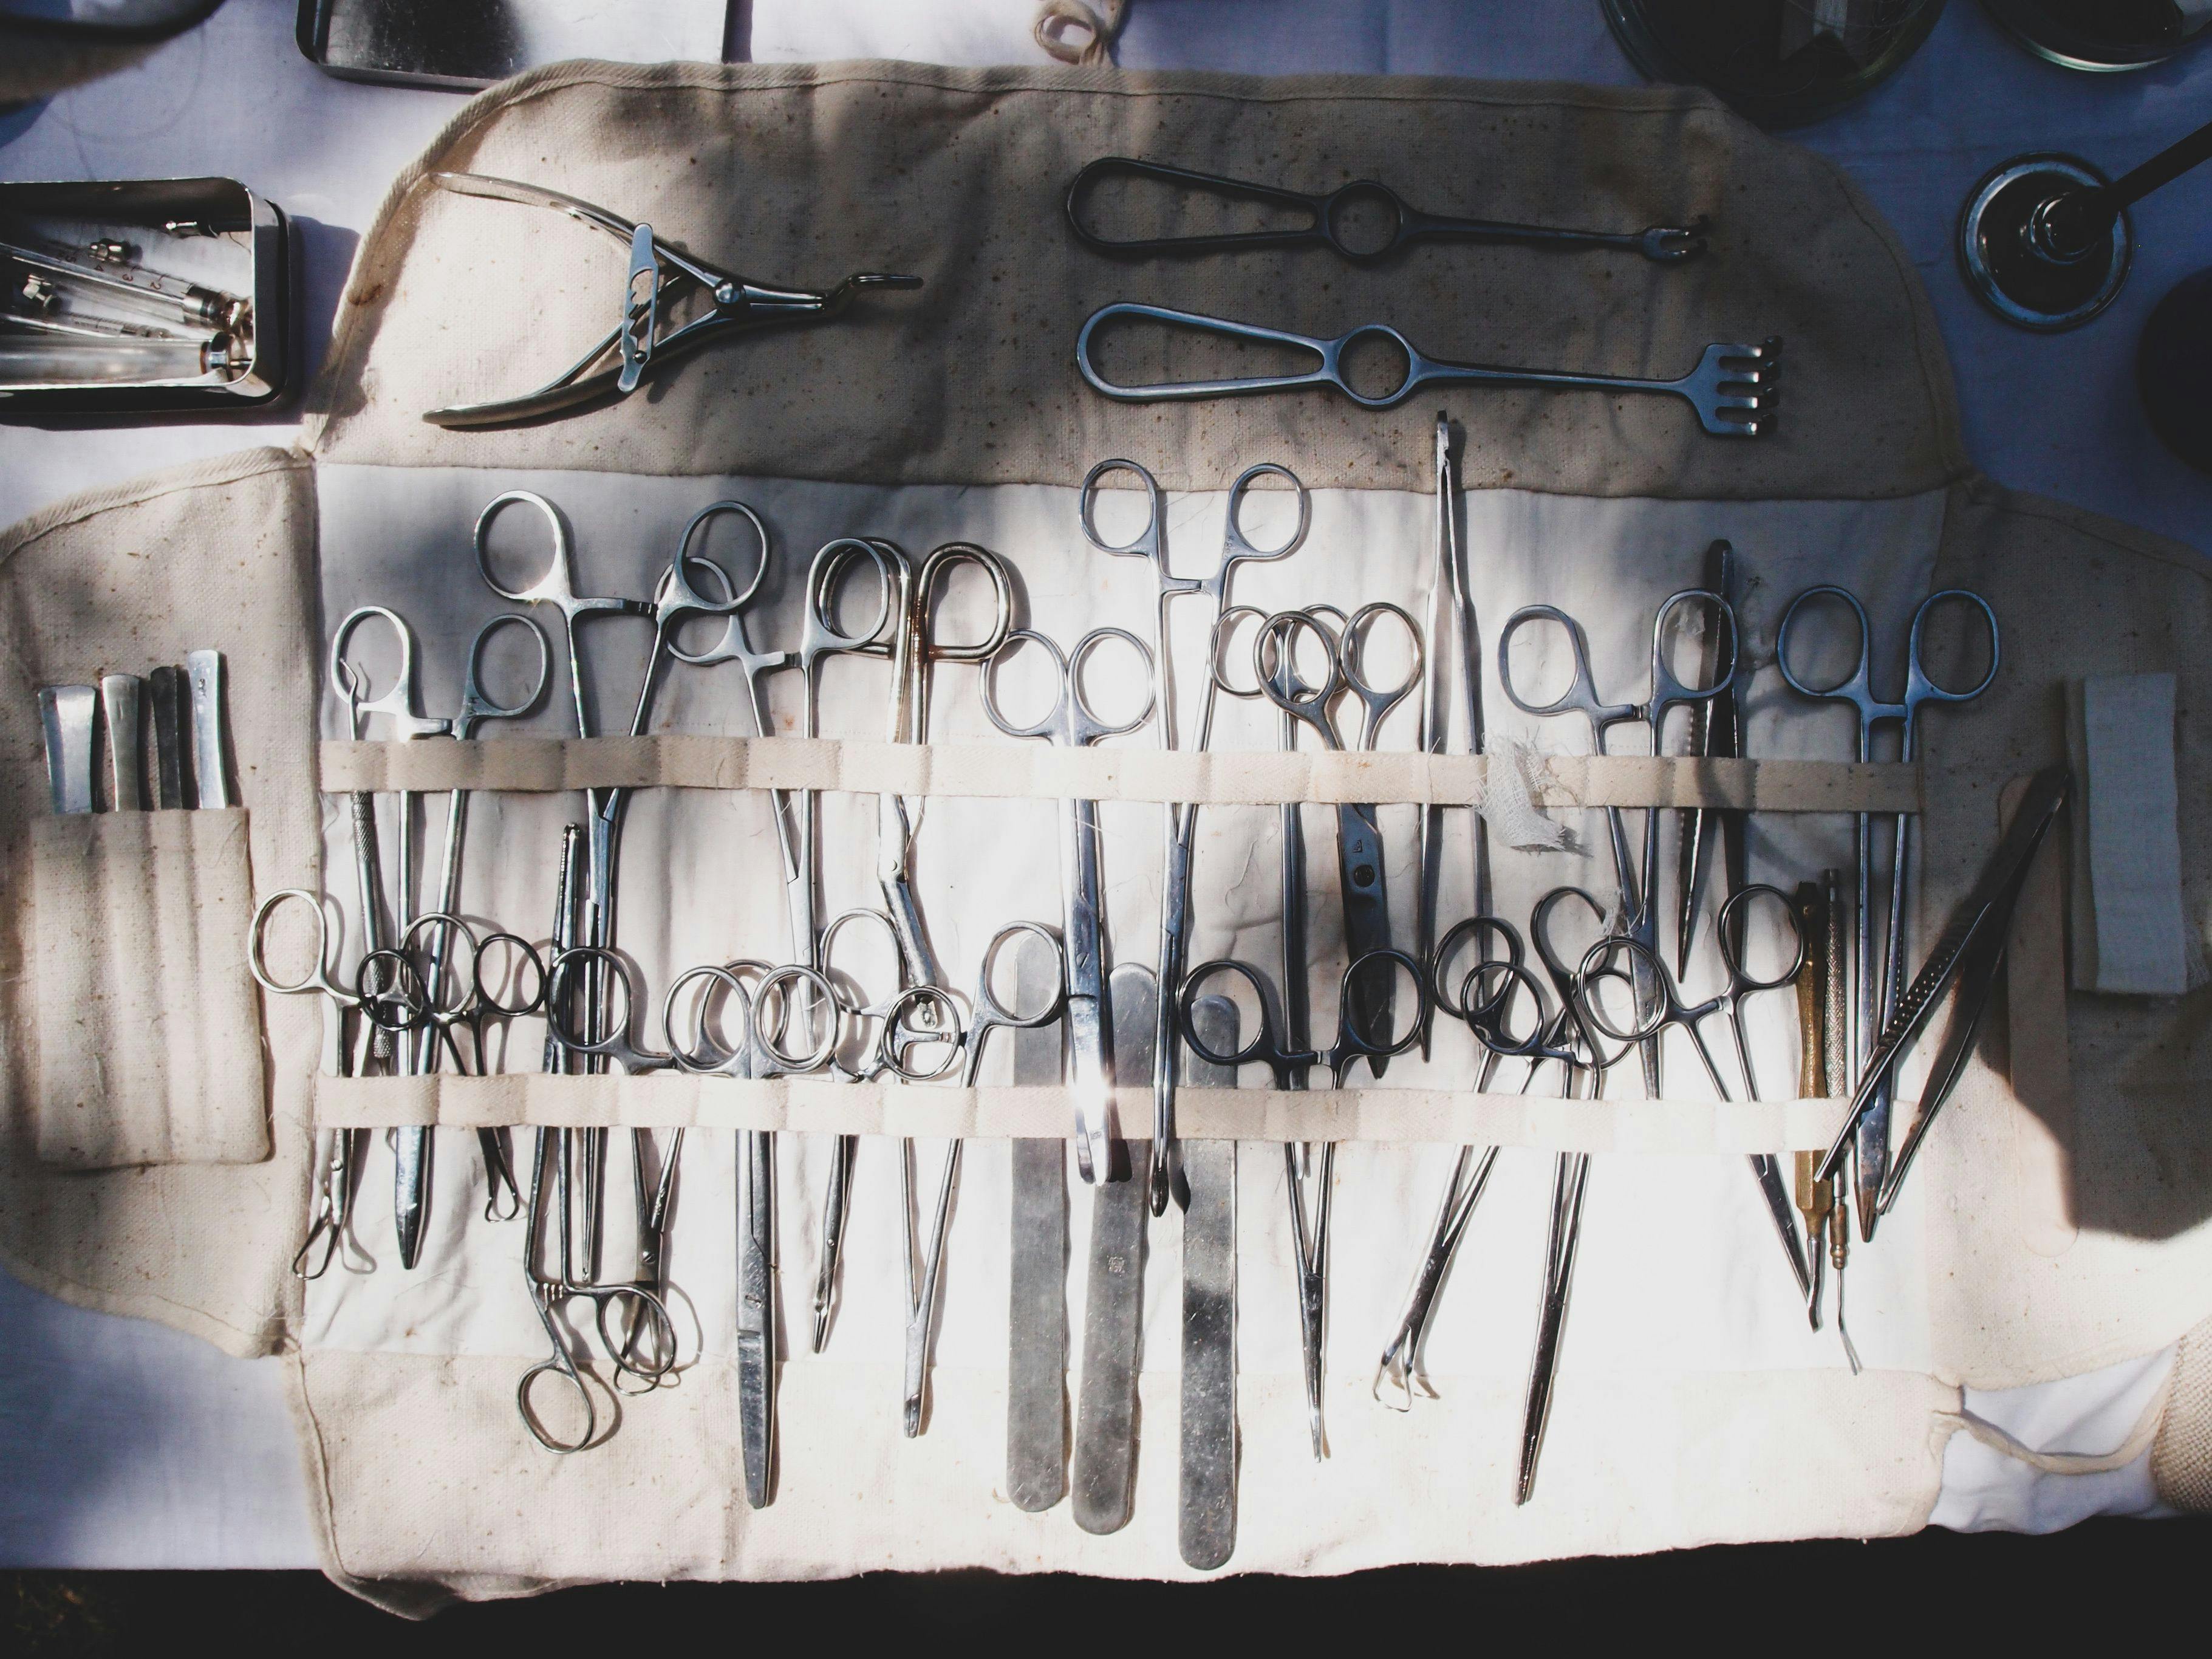 Portable set of vintage surgical instruments from the Second World War © klioli - stock.adobe.com